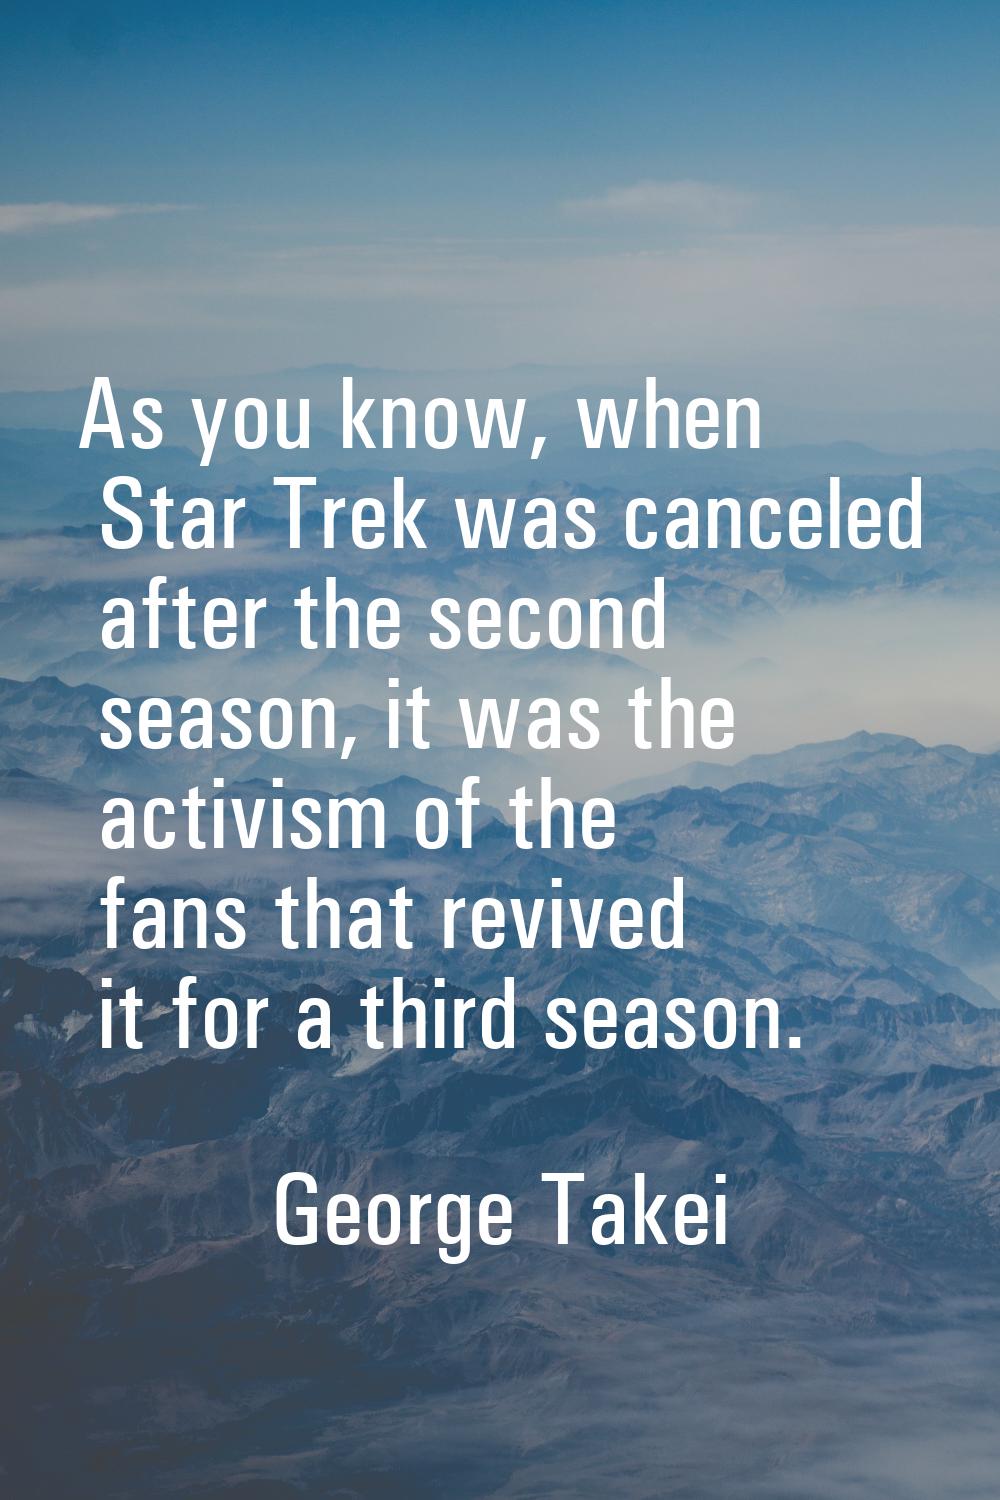 As you know, when Star Trek was canceled after the second season, it was the activism of the fans t